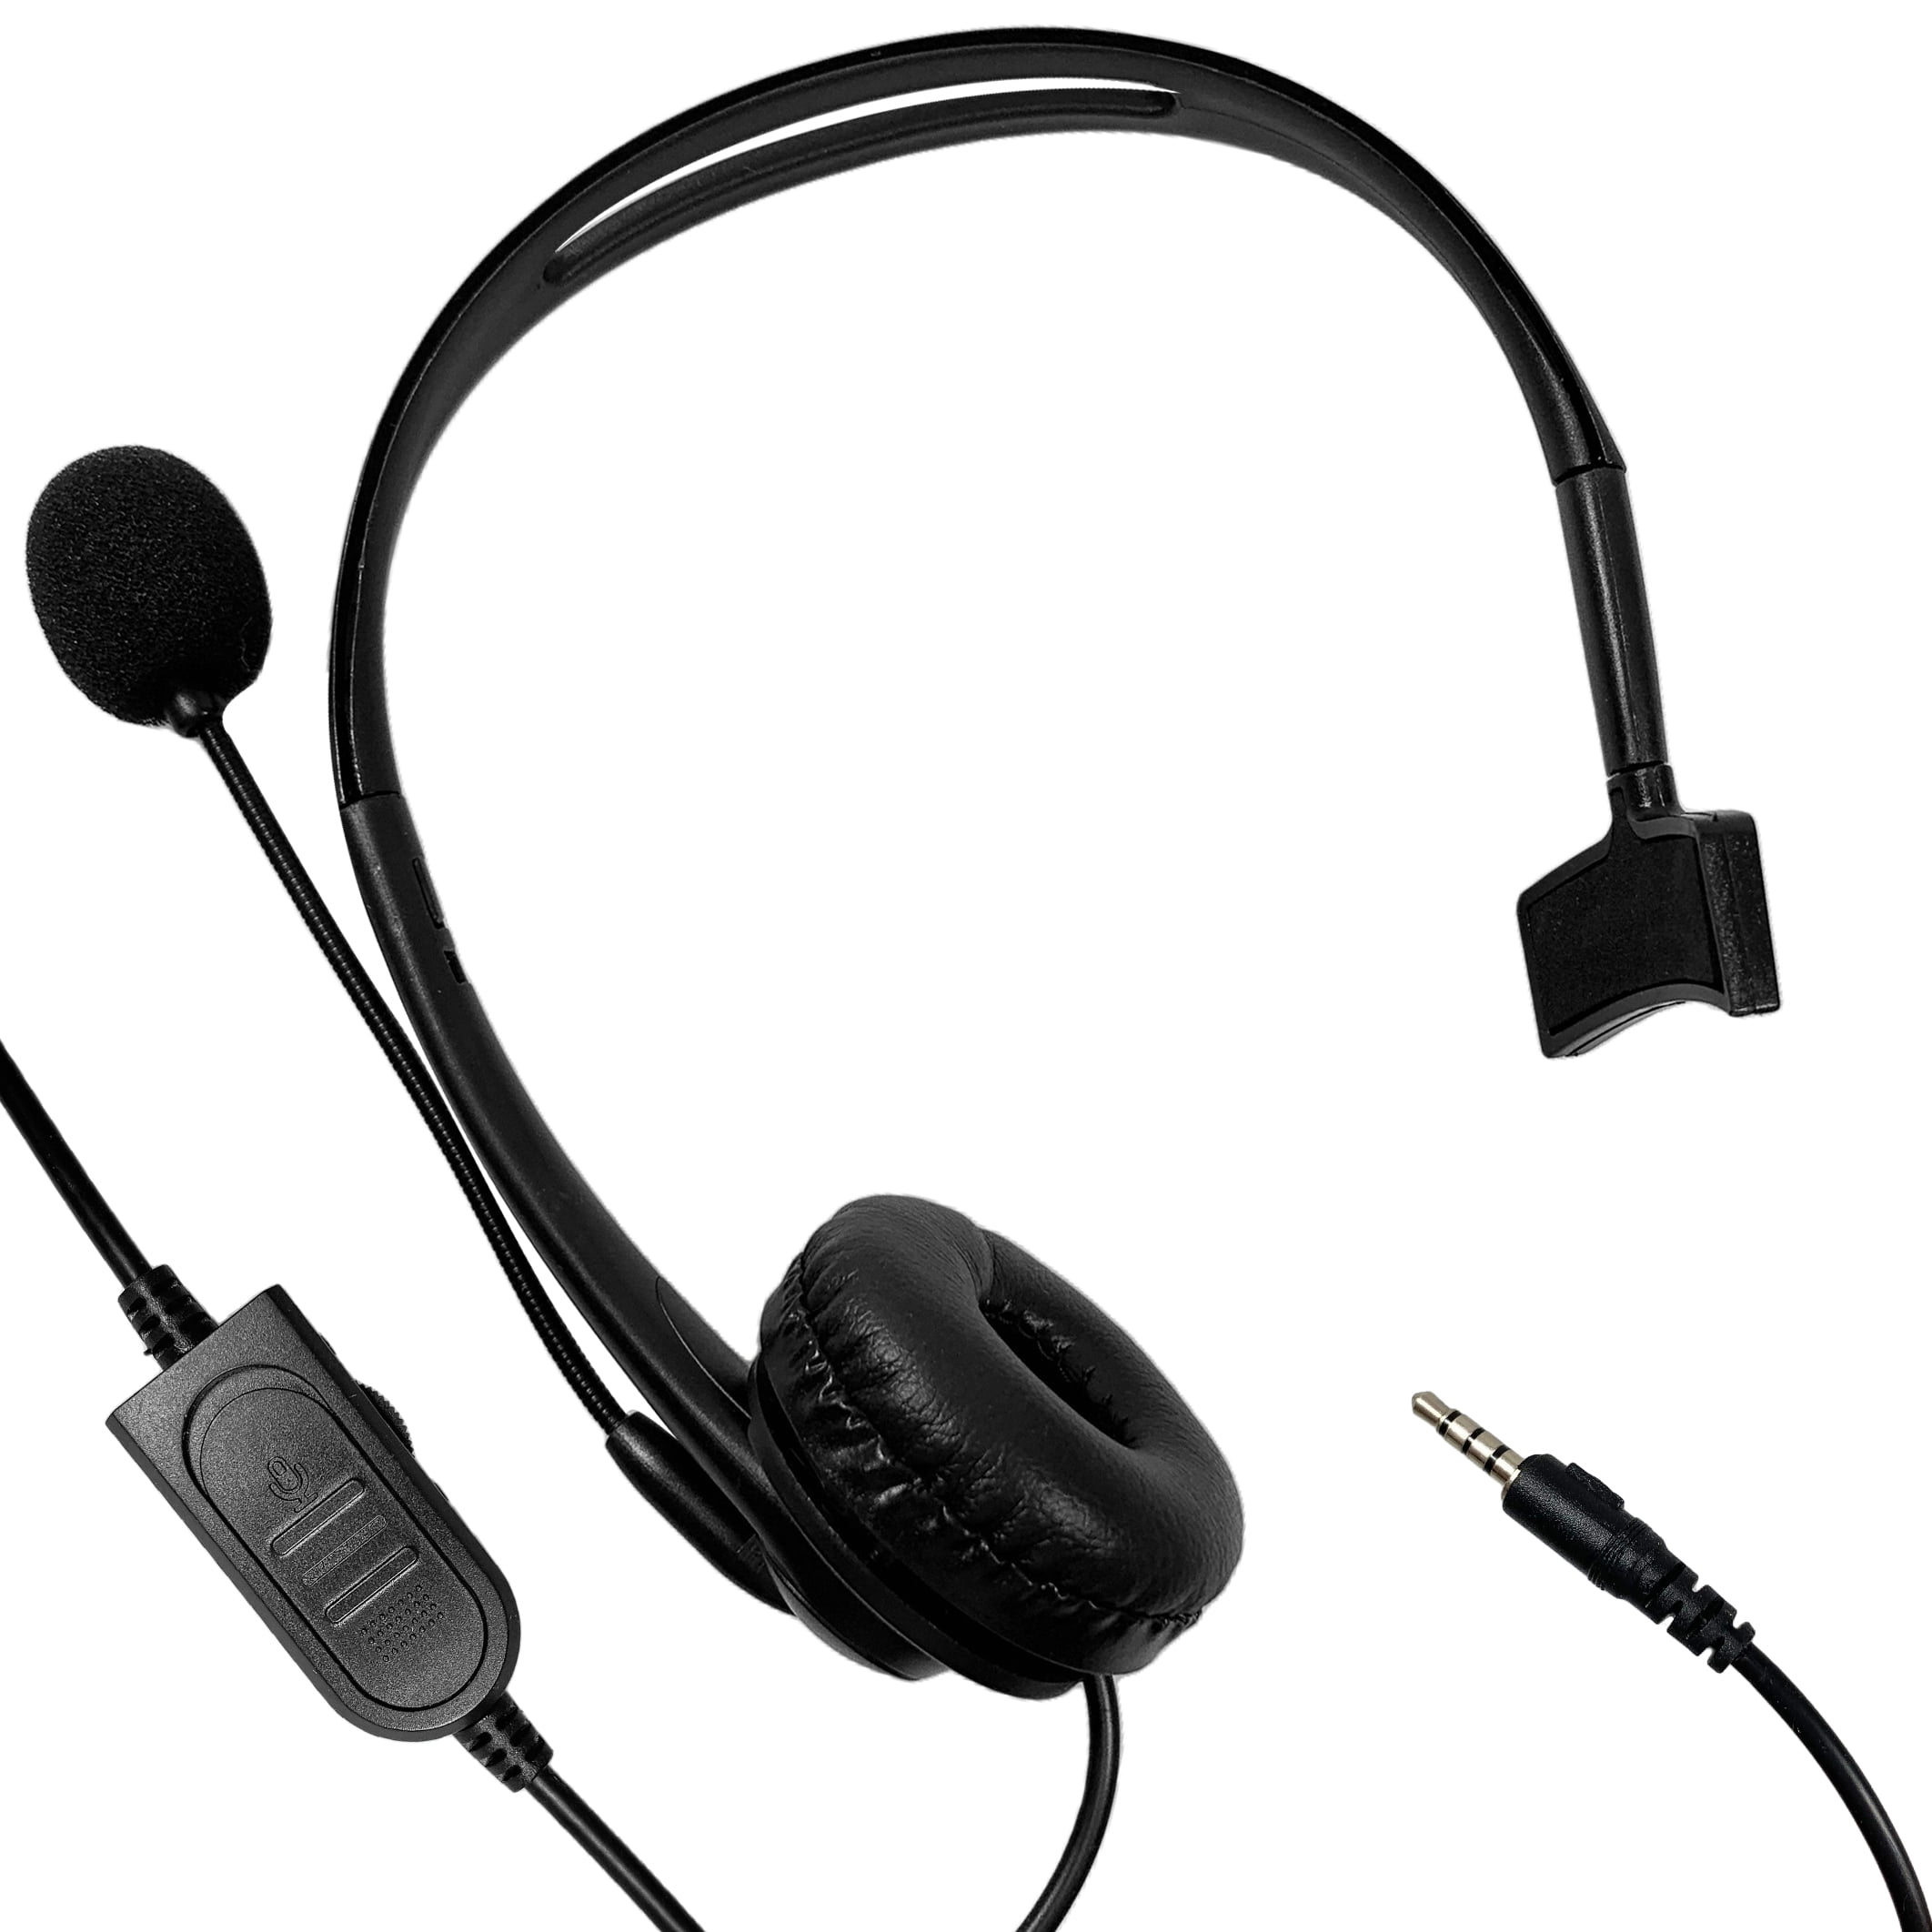 Mic Headset FOR VOIP SKYPE  For Skype MSN VOIP USA Video Chat Cell Phone 